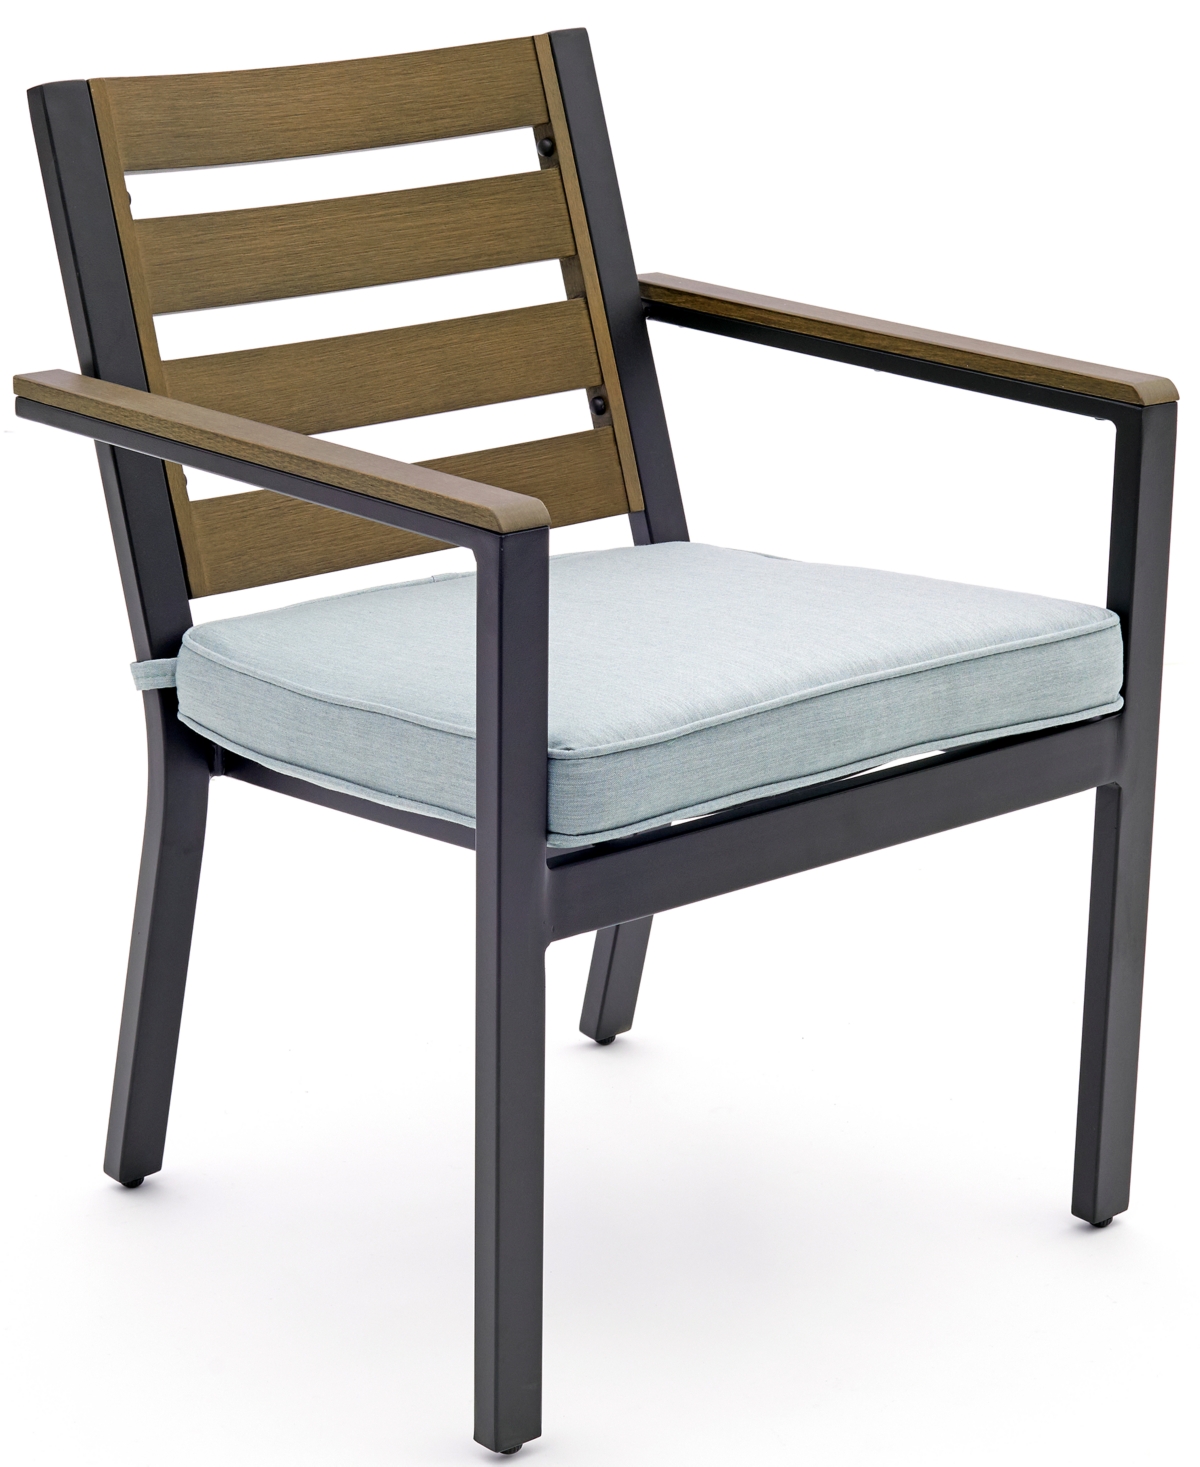 Stockholm Outdoor Dining Chair, Created for Macys